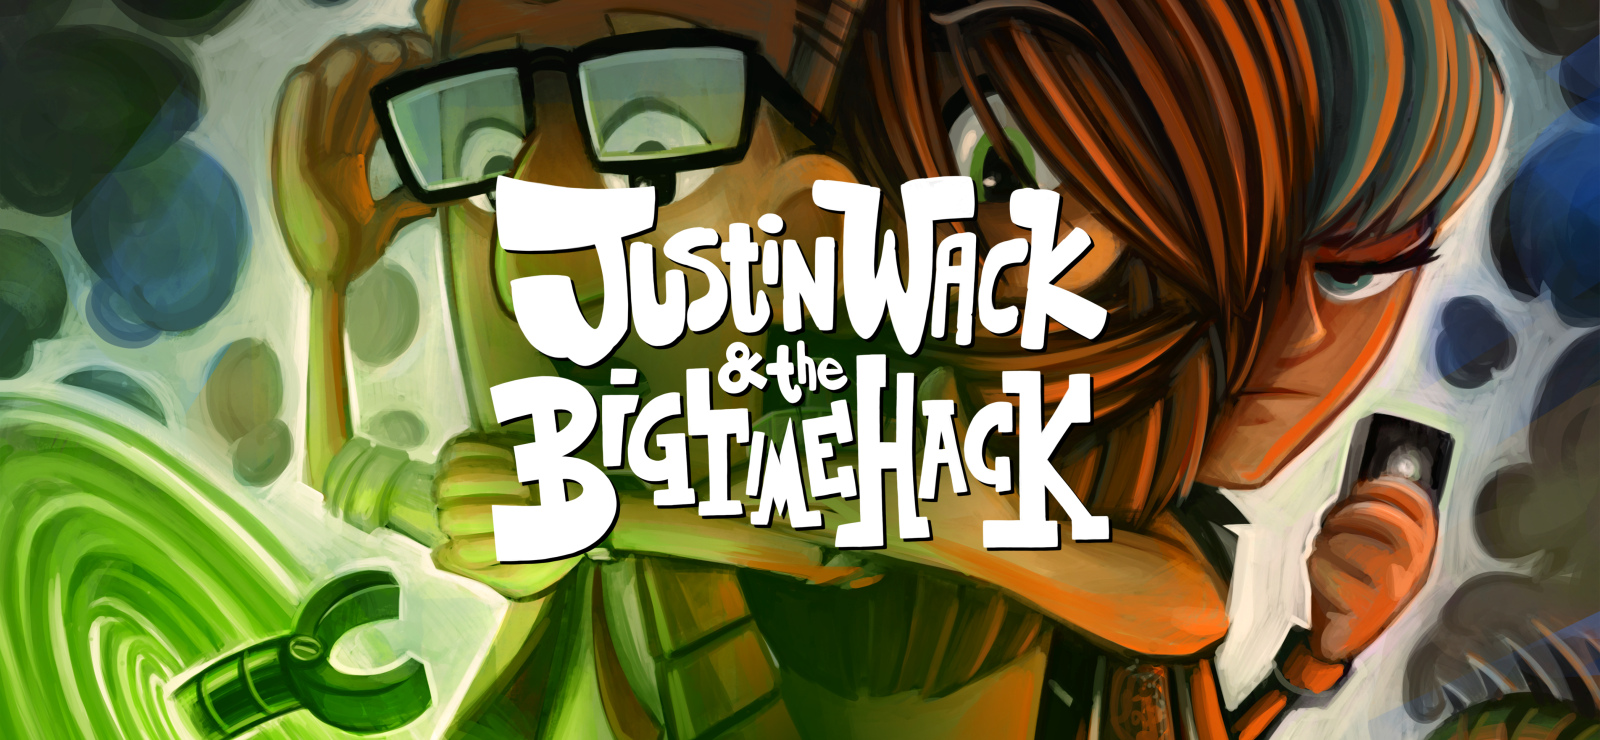 Justin Wack And The Big Time Hack - Deluxe Edition